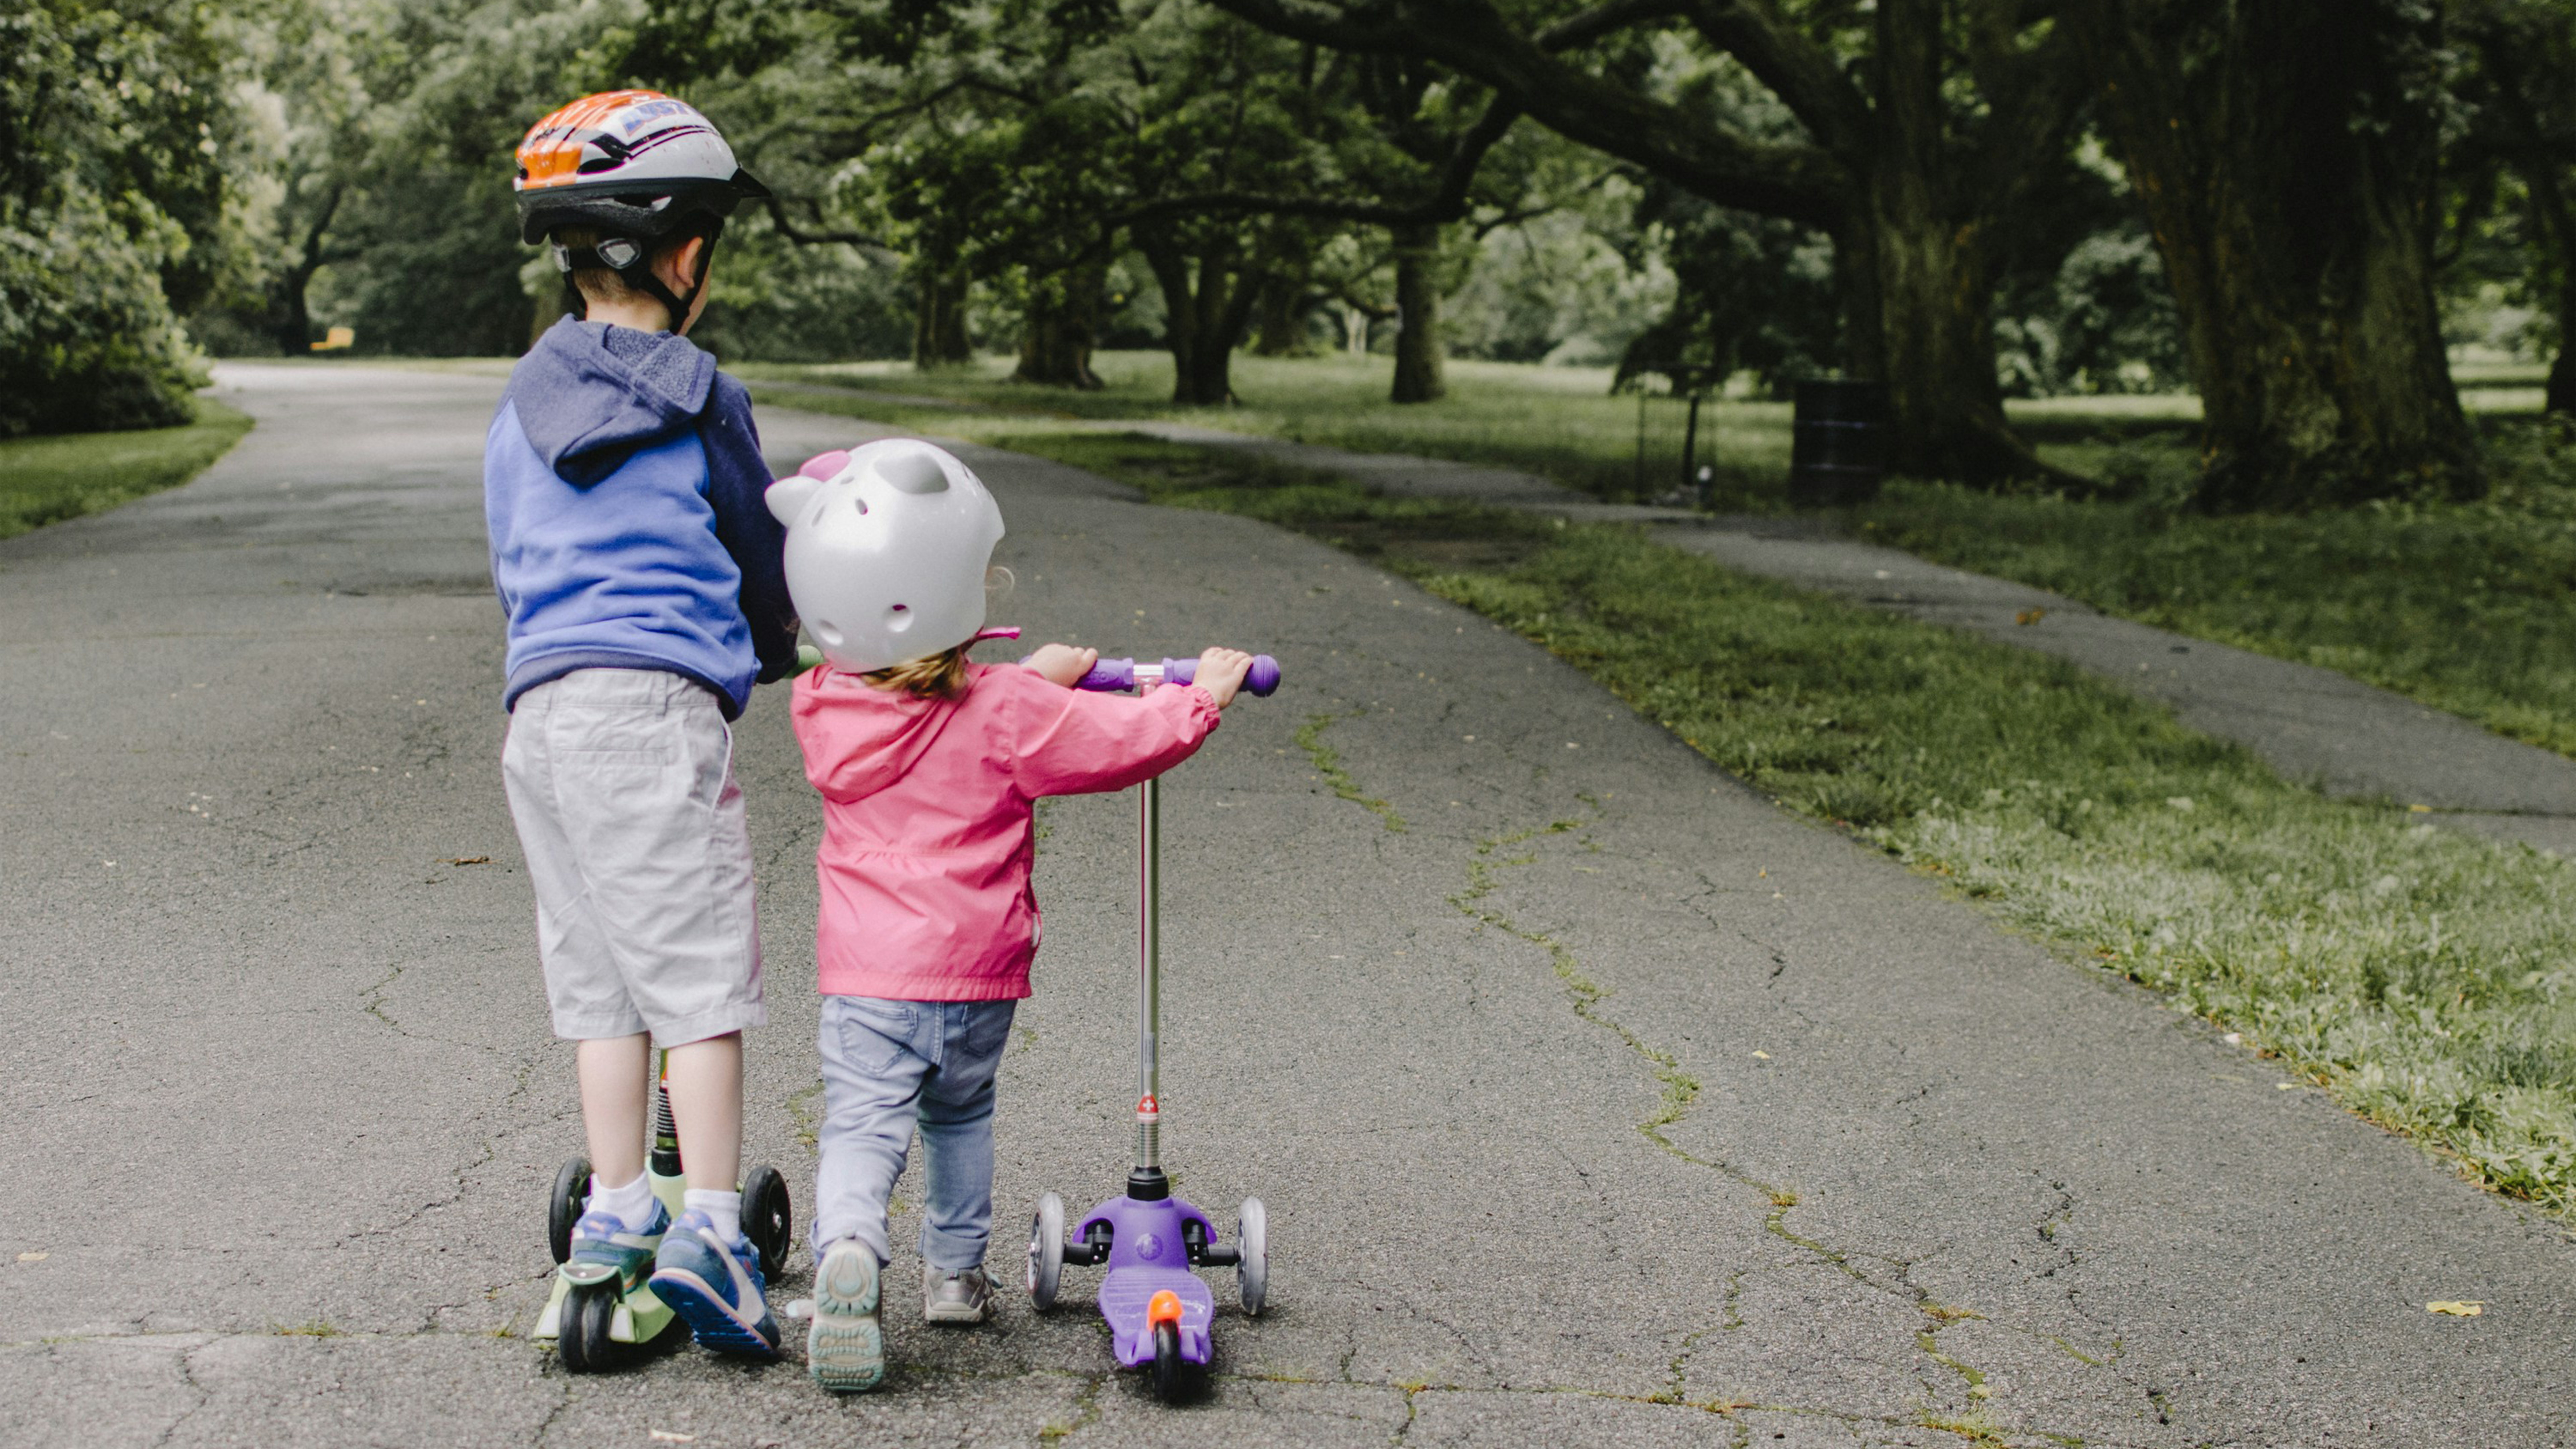 Two children on scooters facing away from the camera as they ride down a road lined with trees.